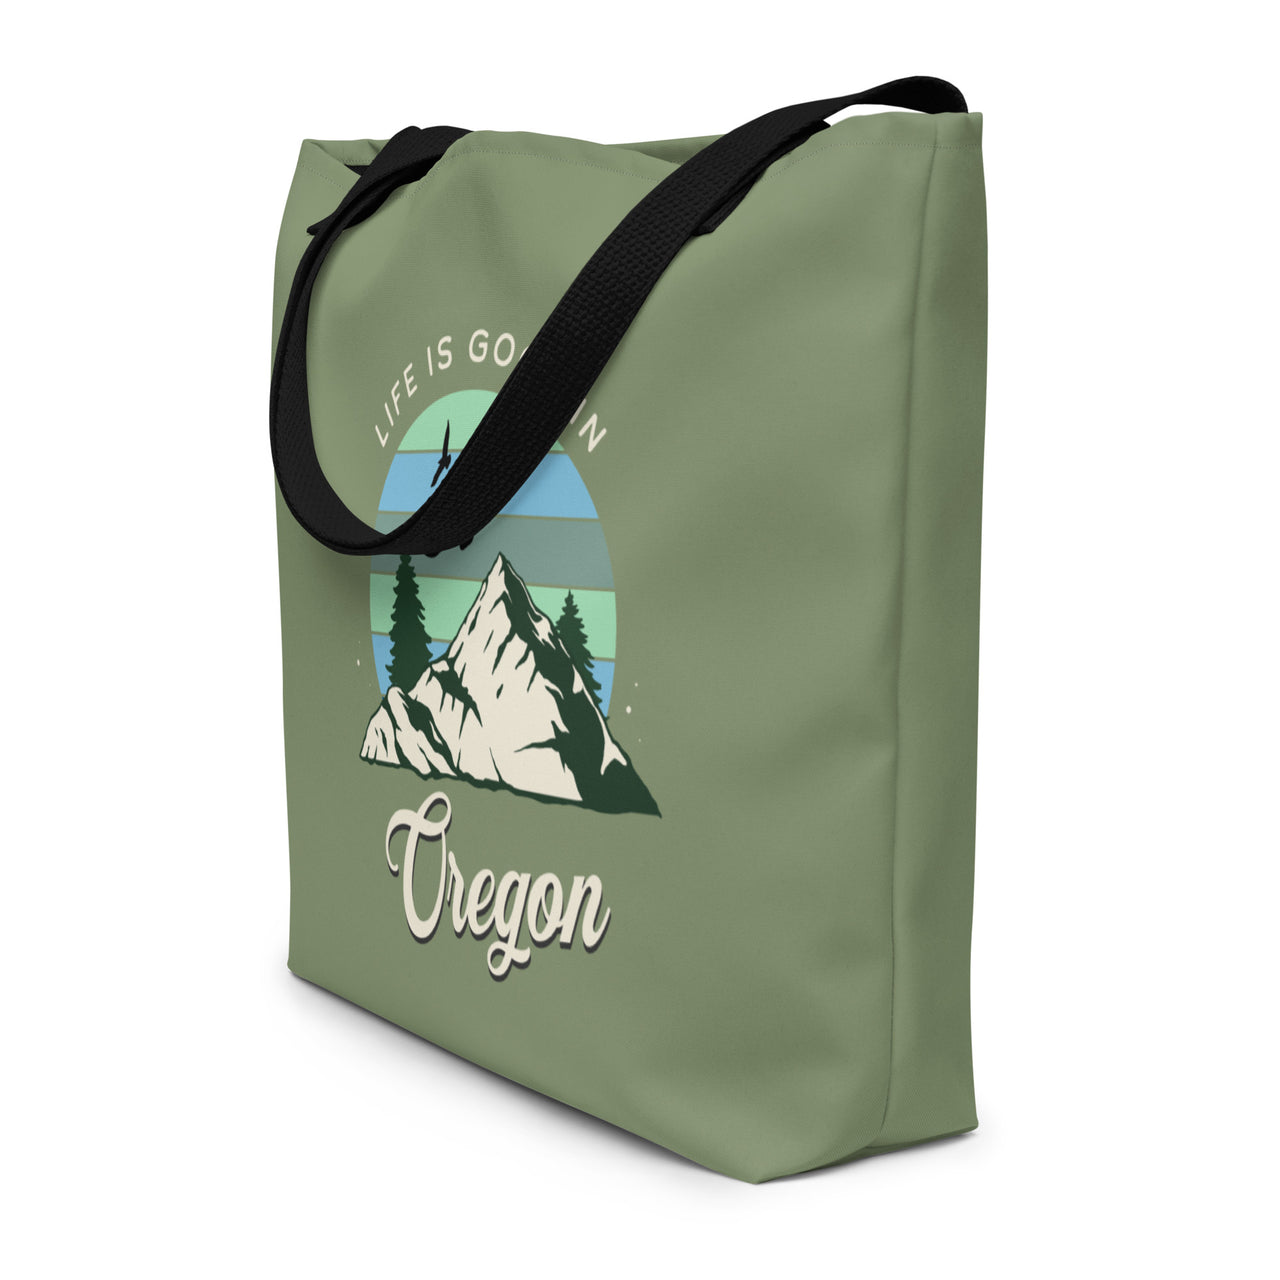 Life is Good in Oregon - Large 16x20 Tote Bag W/Pocket